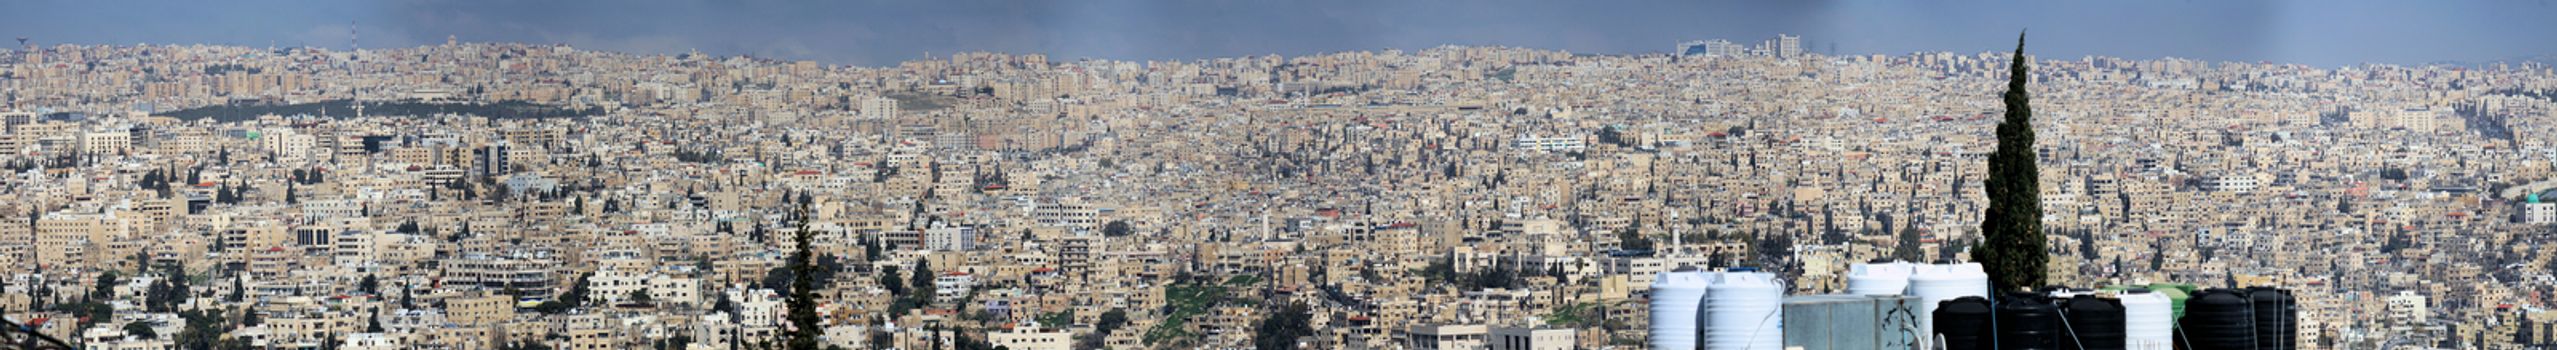 High resolution panoramic view from the not very nice development of Amman, the capital of the Kingdom of Jordan, middle east